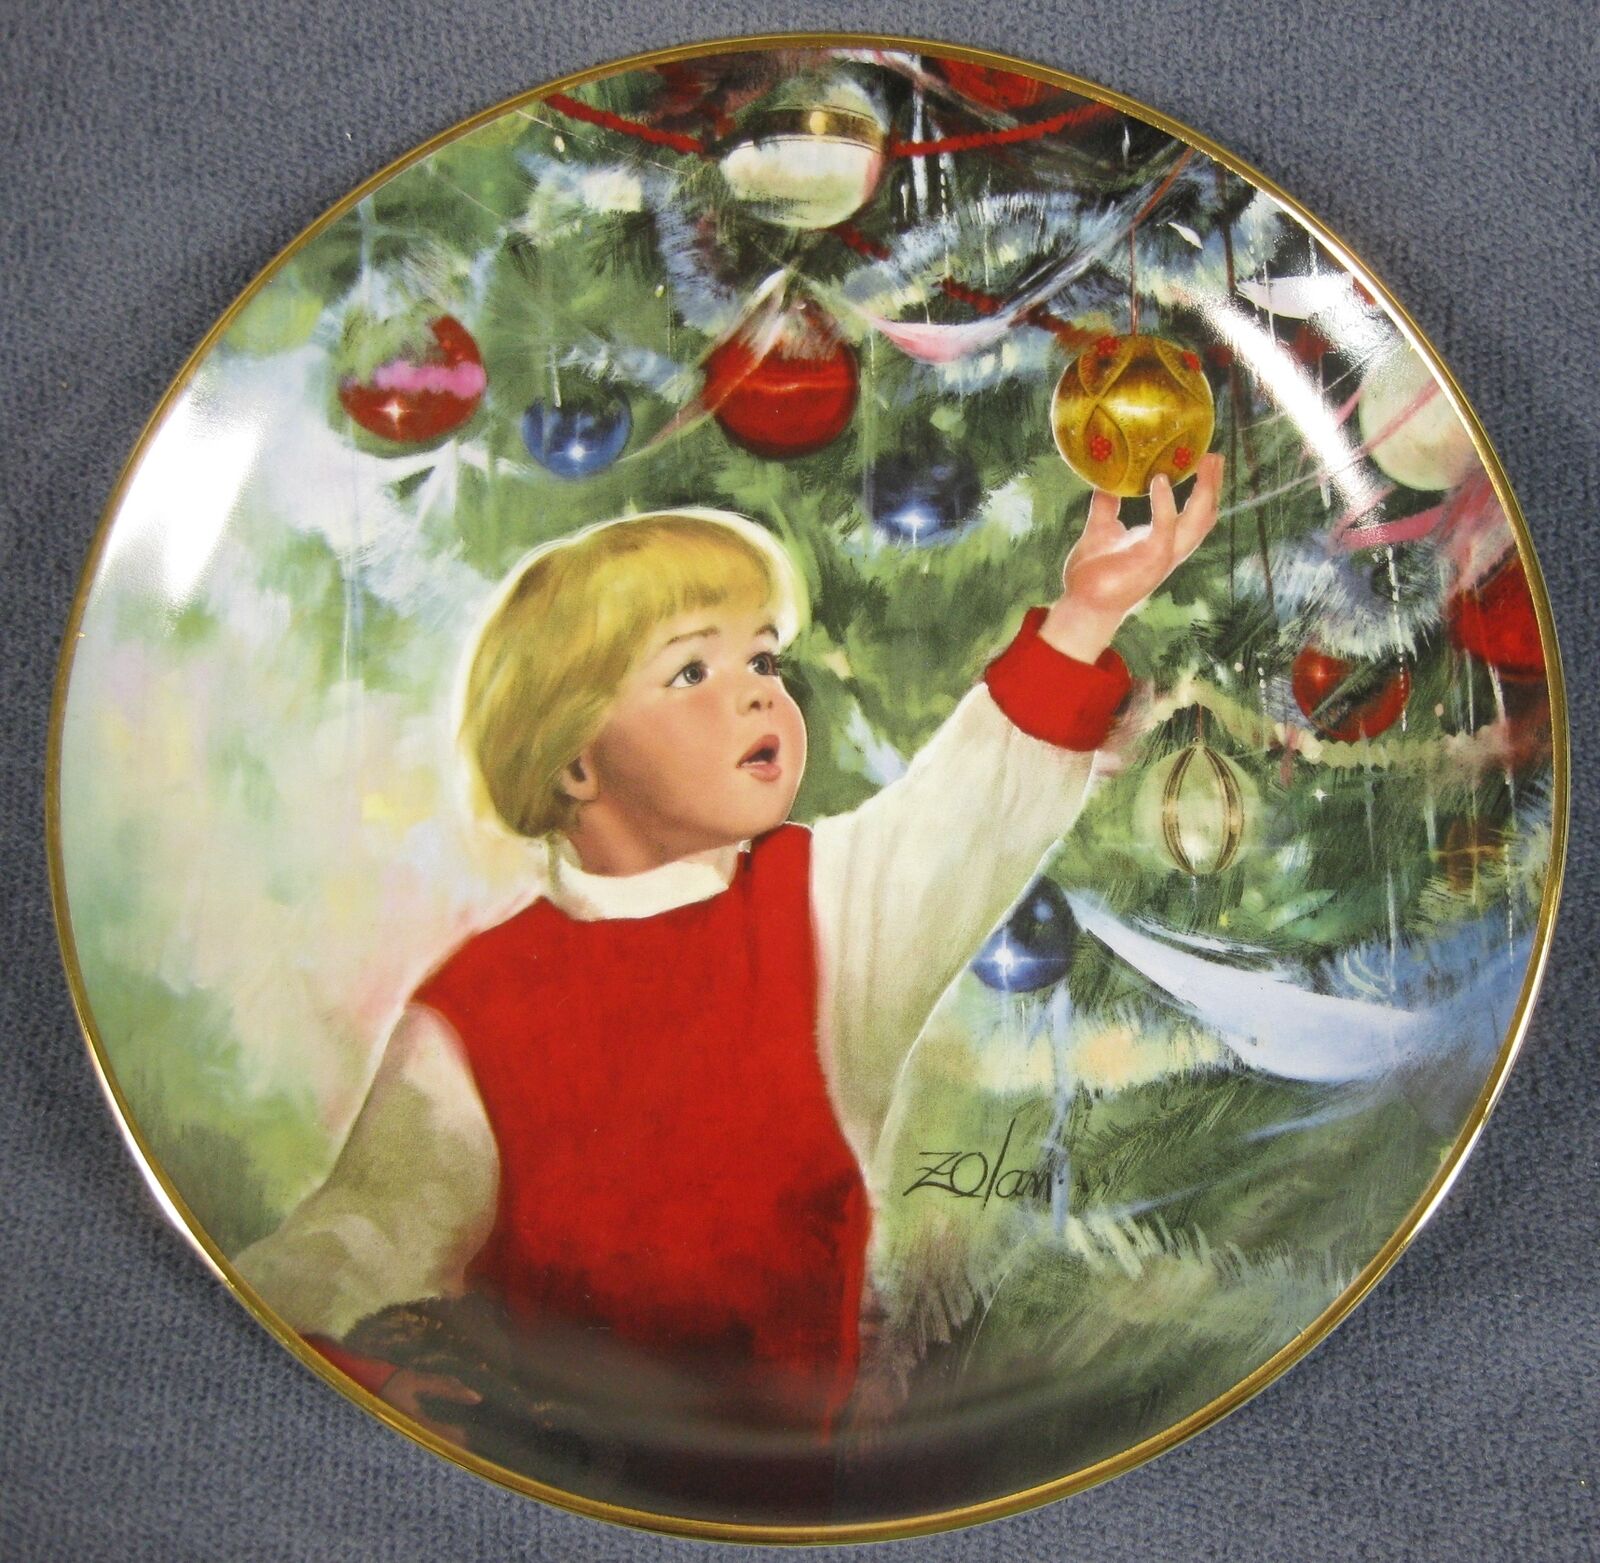 Erick's Delight Donald Zolan Wonders Of Youth Collectors Plate Pemberton & Oakes